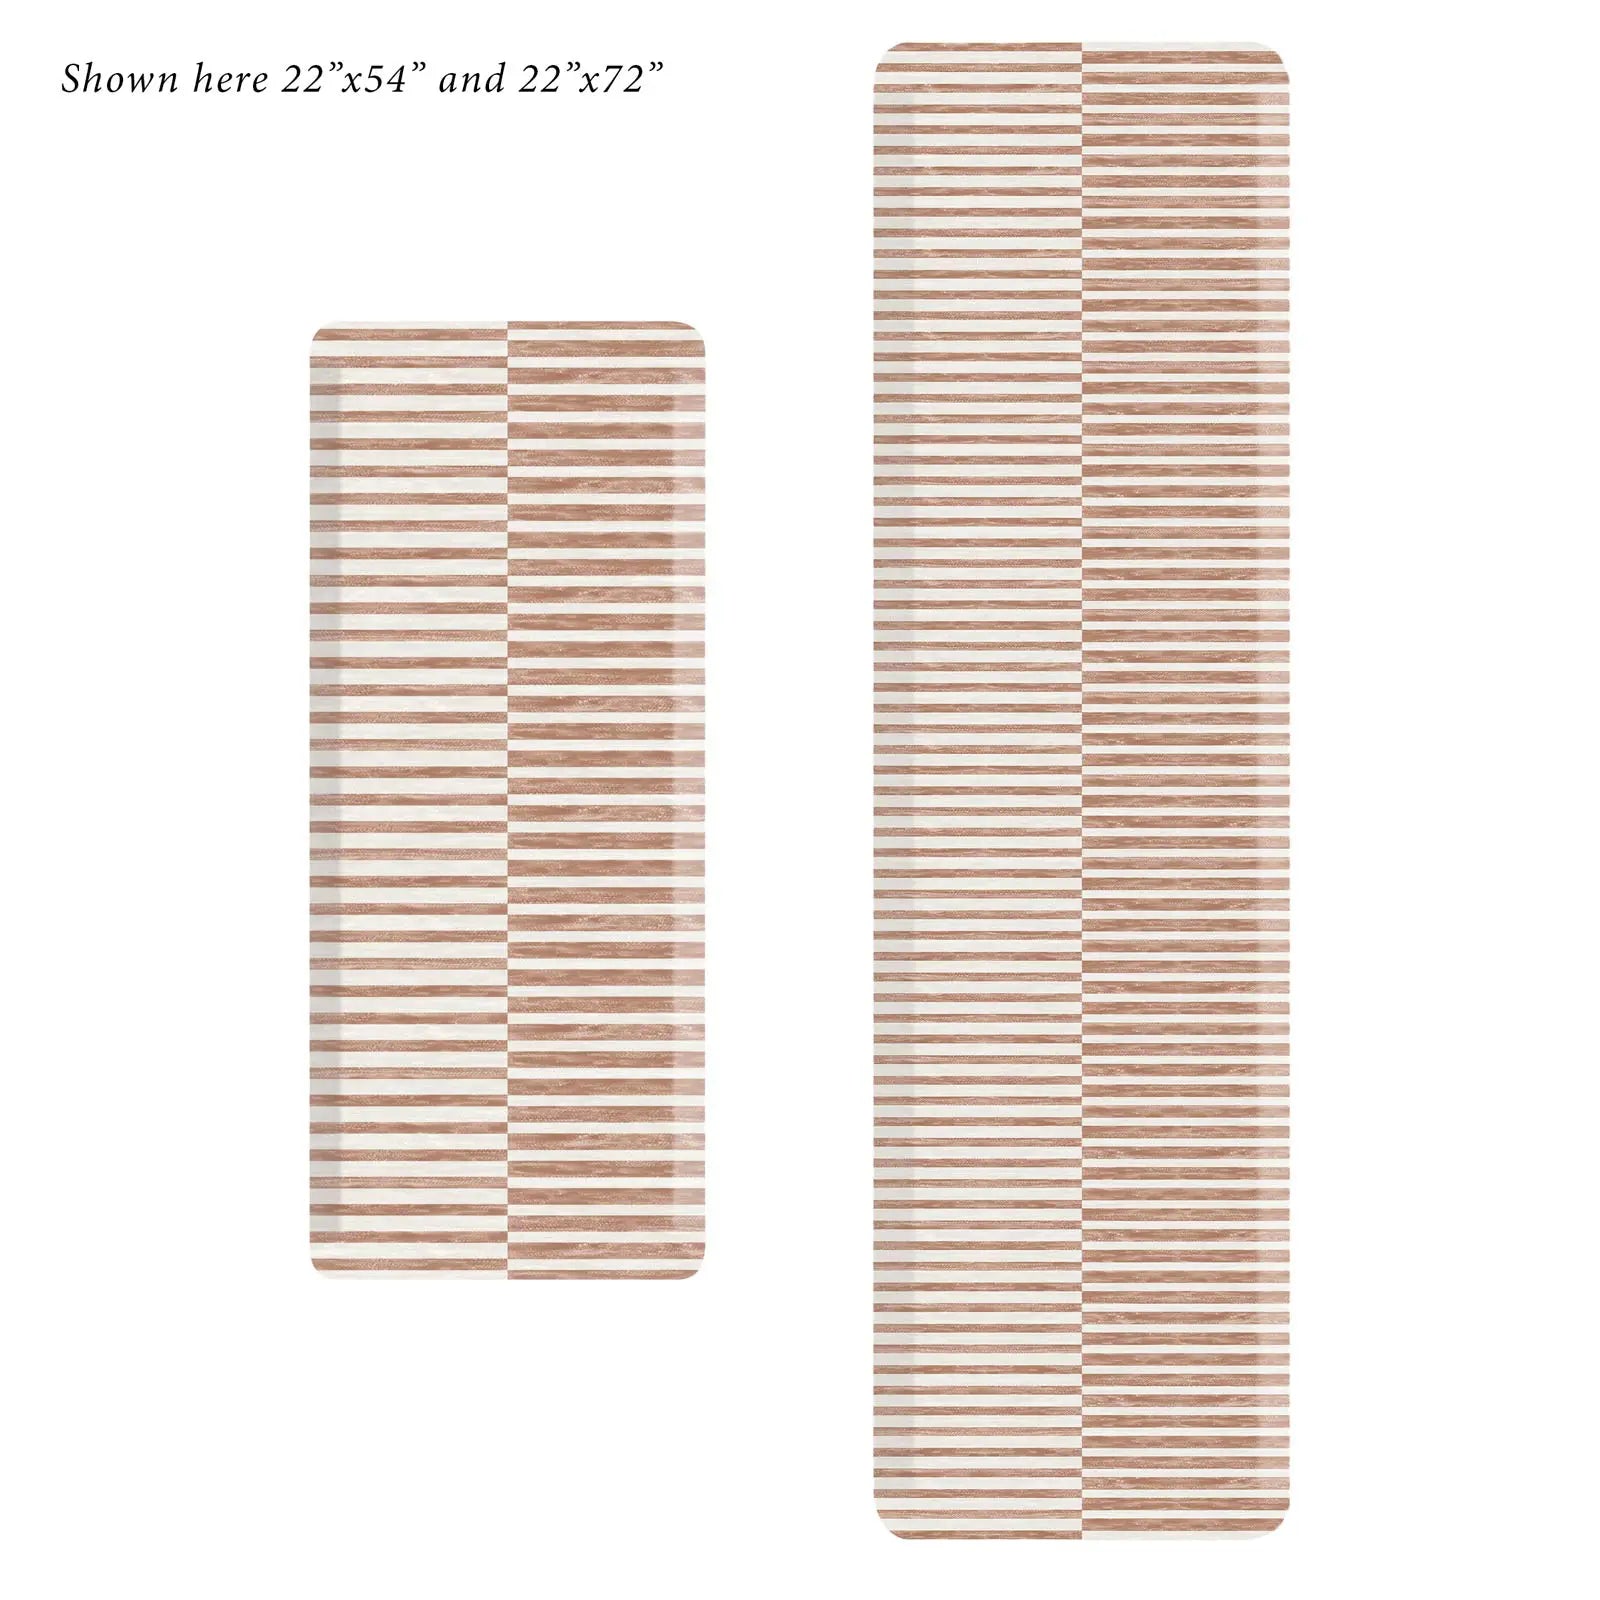 Reese terracotta brown and white striped standing mat shown in sizes 22x54 and 22x72